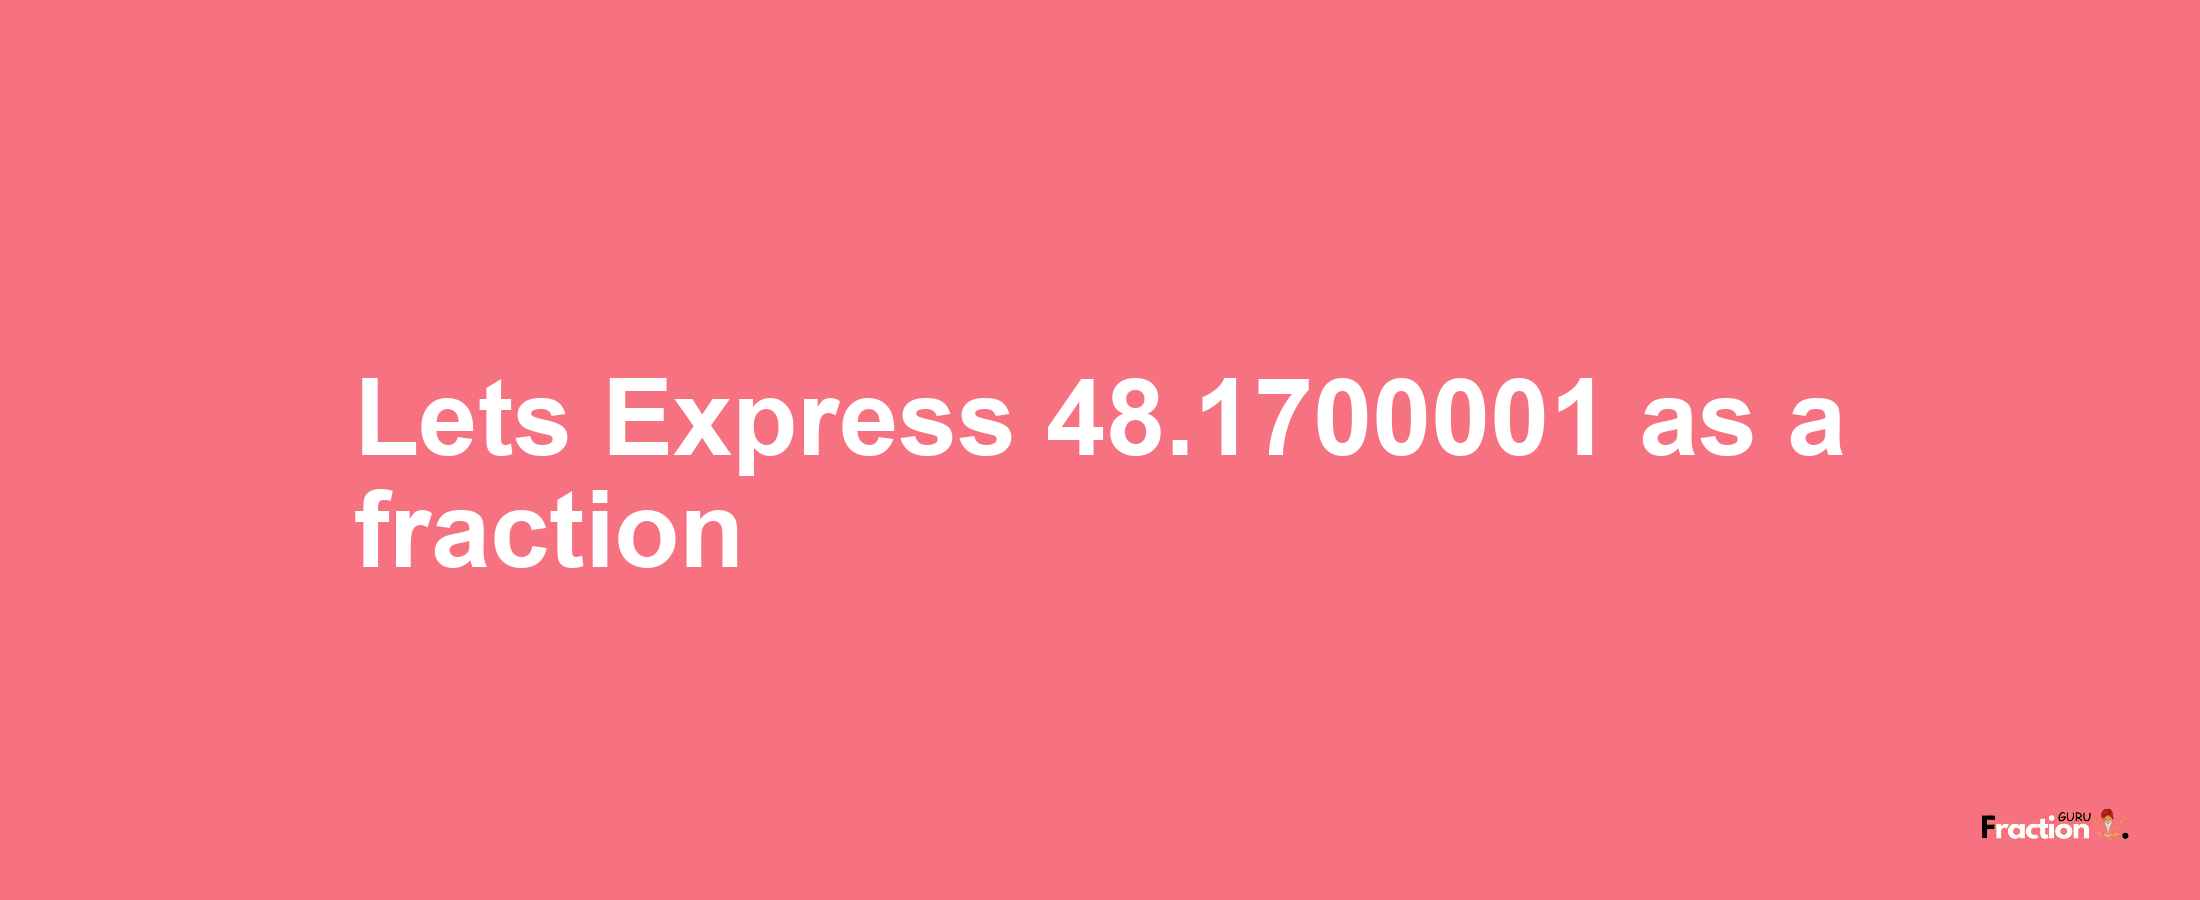 Lets Express 48.1700001 as afraction